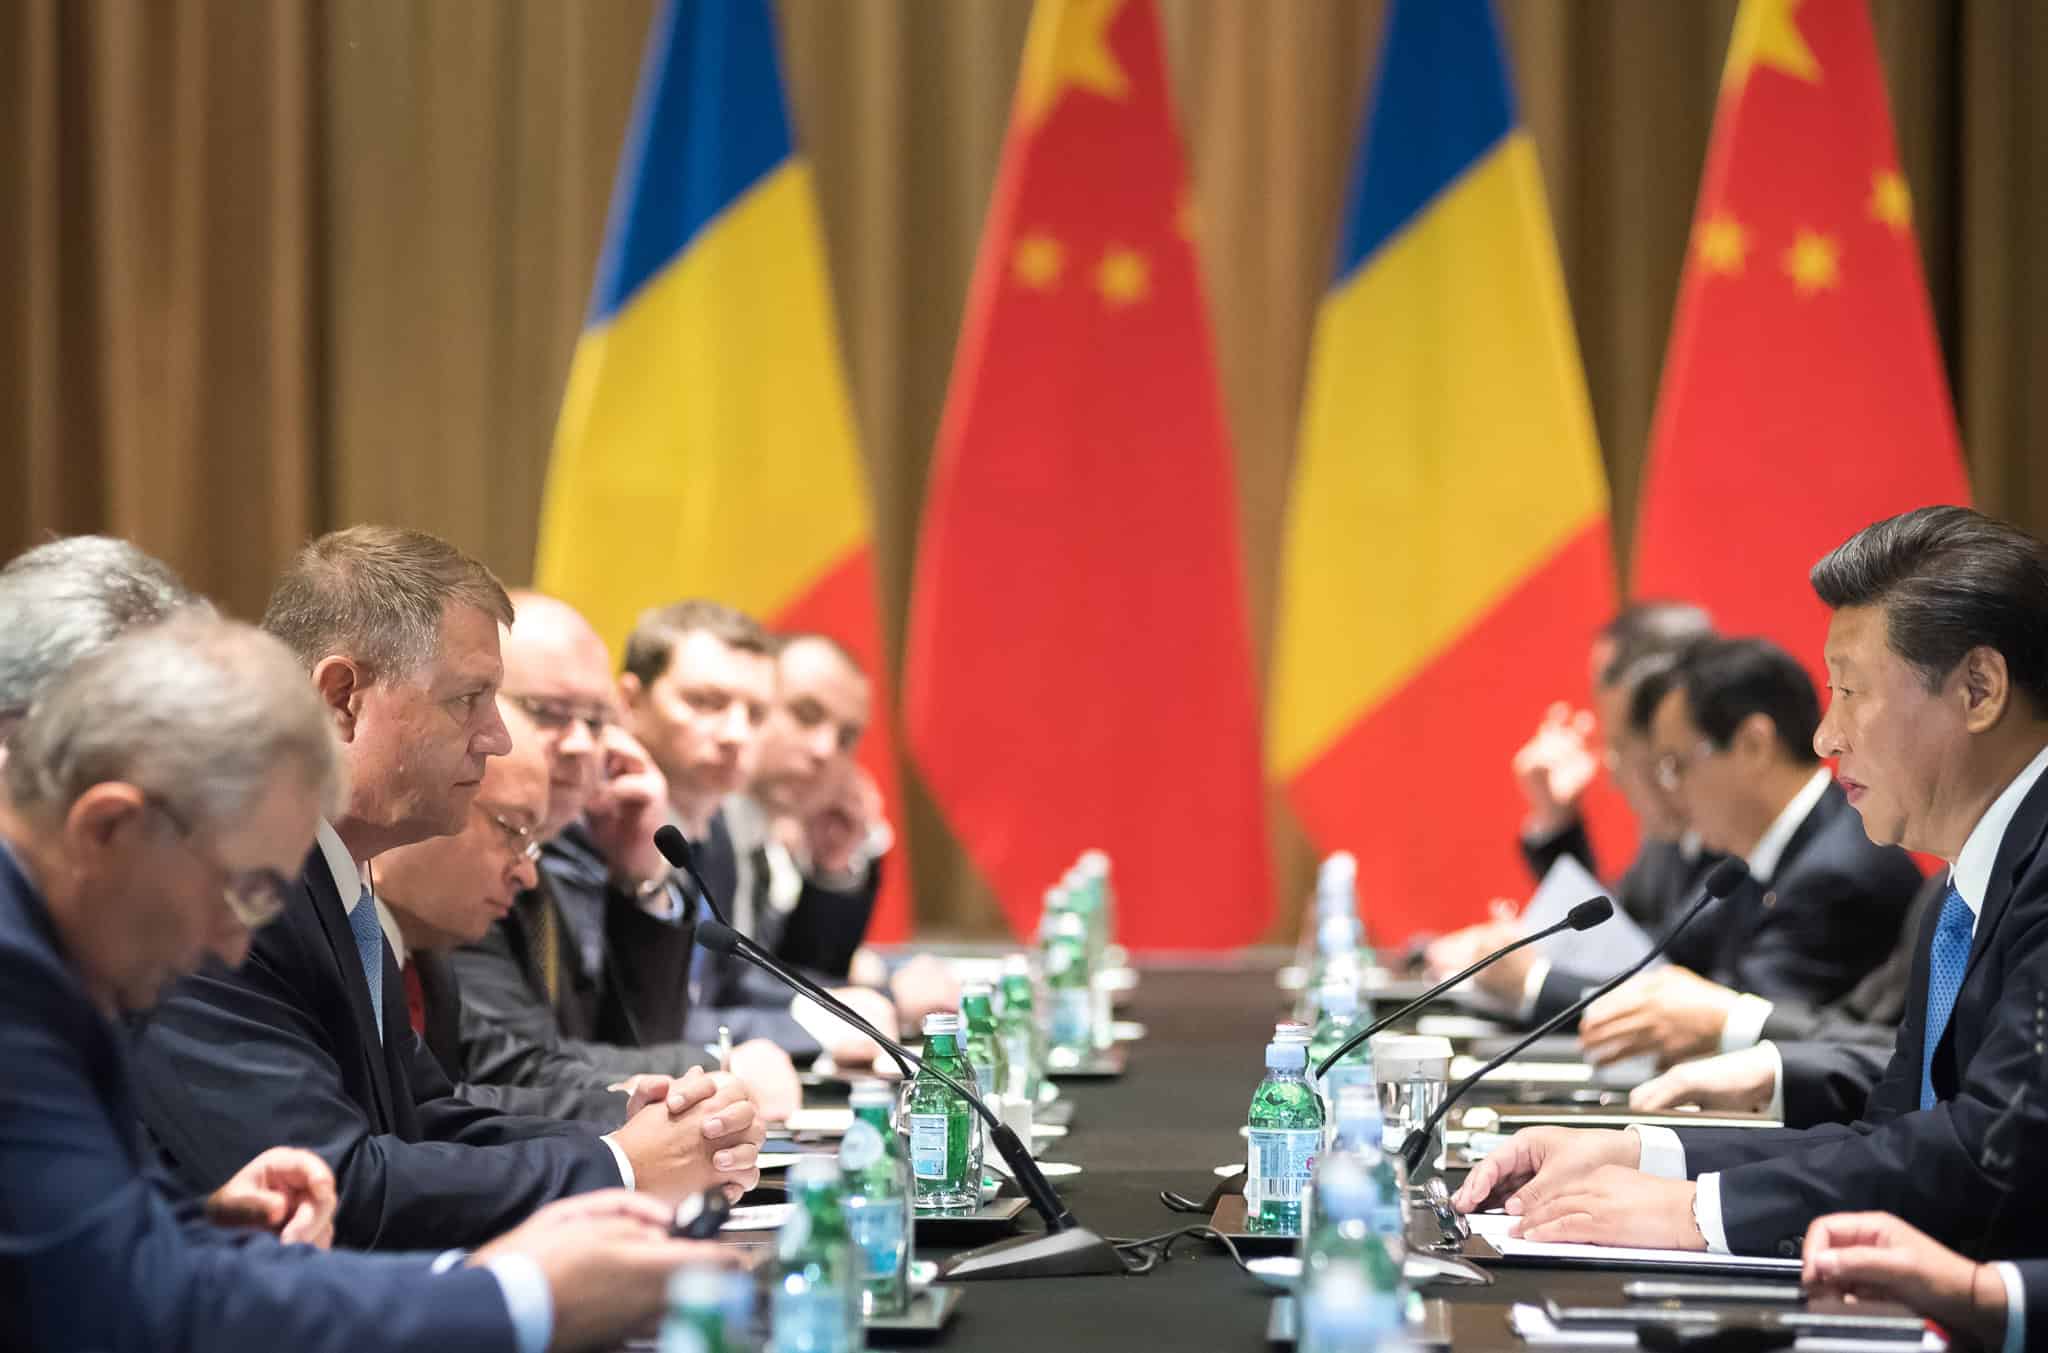 China’s (lack of) presence in Romania’s strategic sector: Regional outlier or historical path dependency?